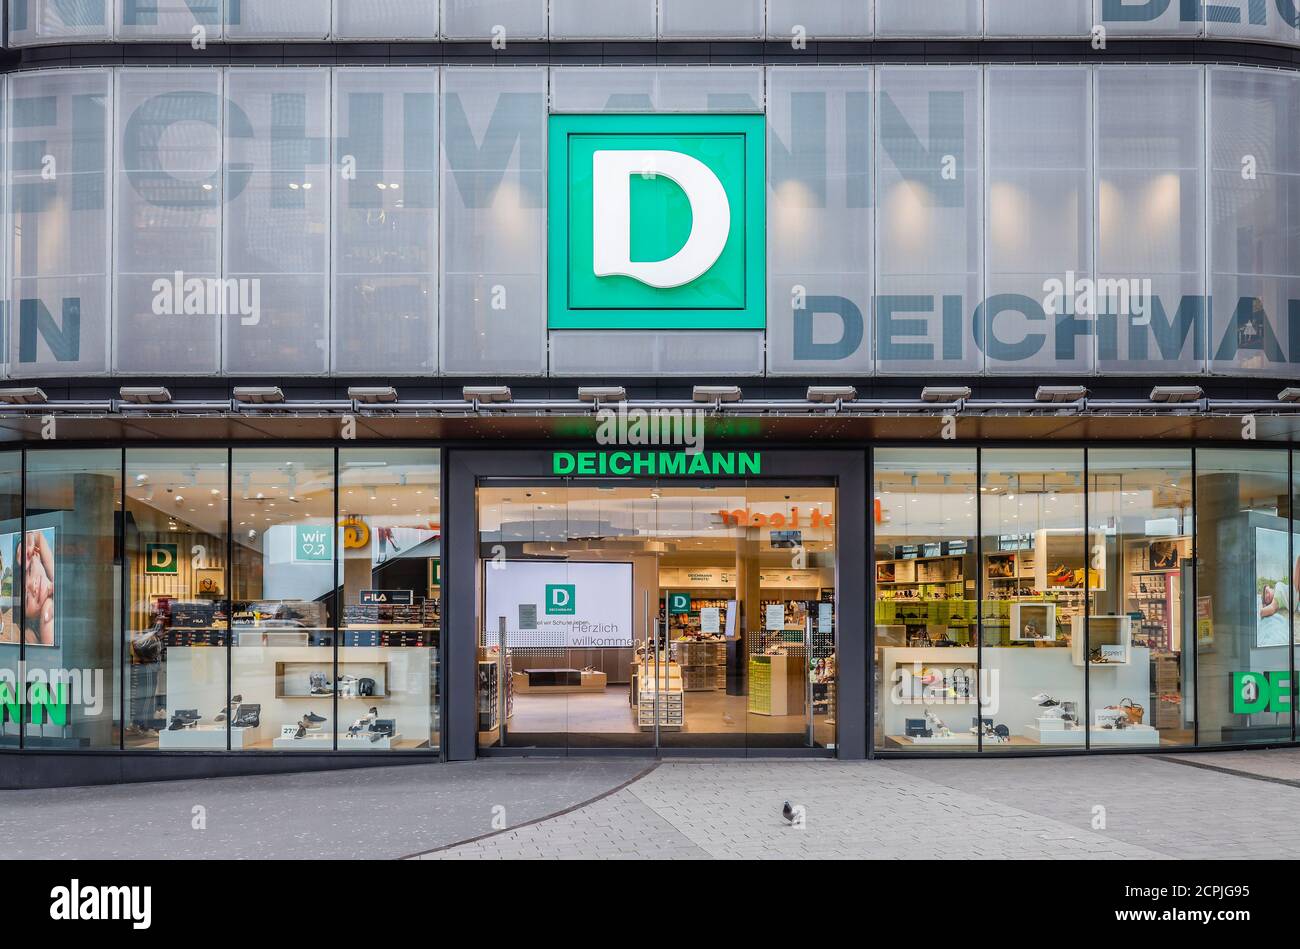 ubehageligt lys pære Forord Deichmann Shops High Resolution Stock Photography and Images - Alamy